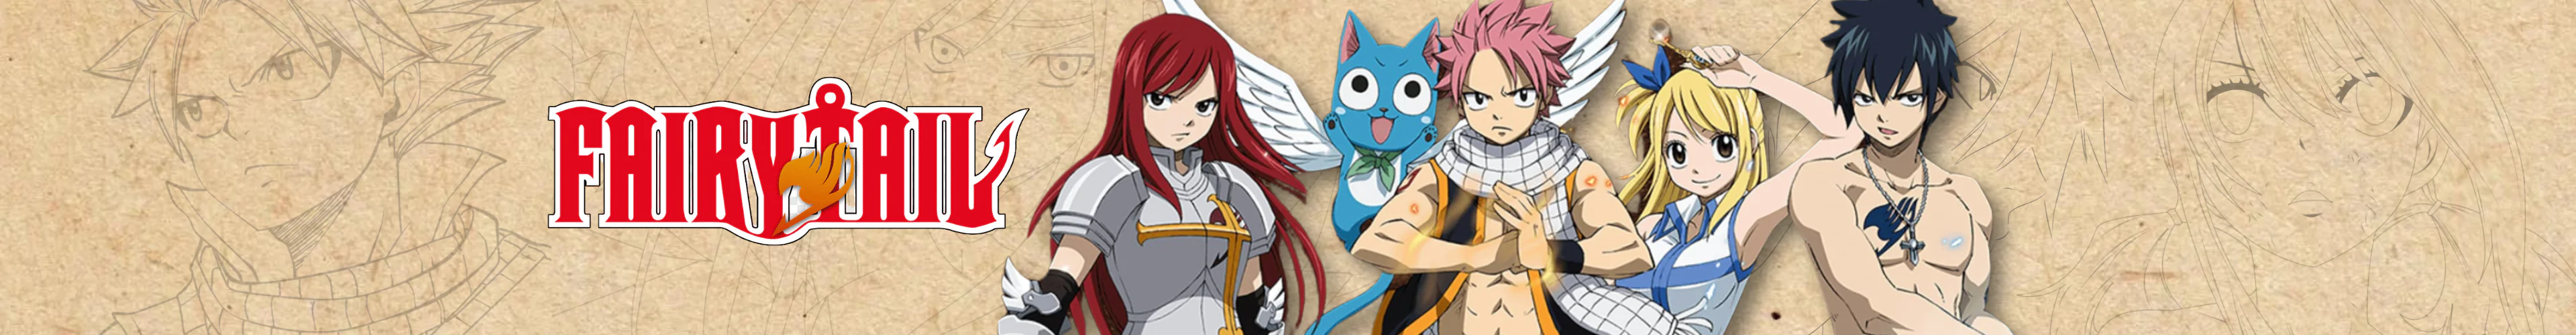 Fairy Tail plushes banner